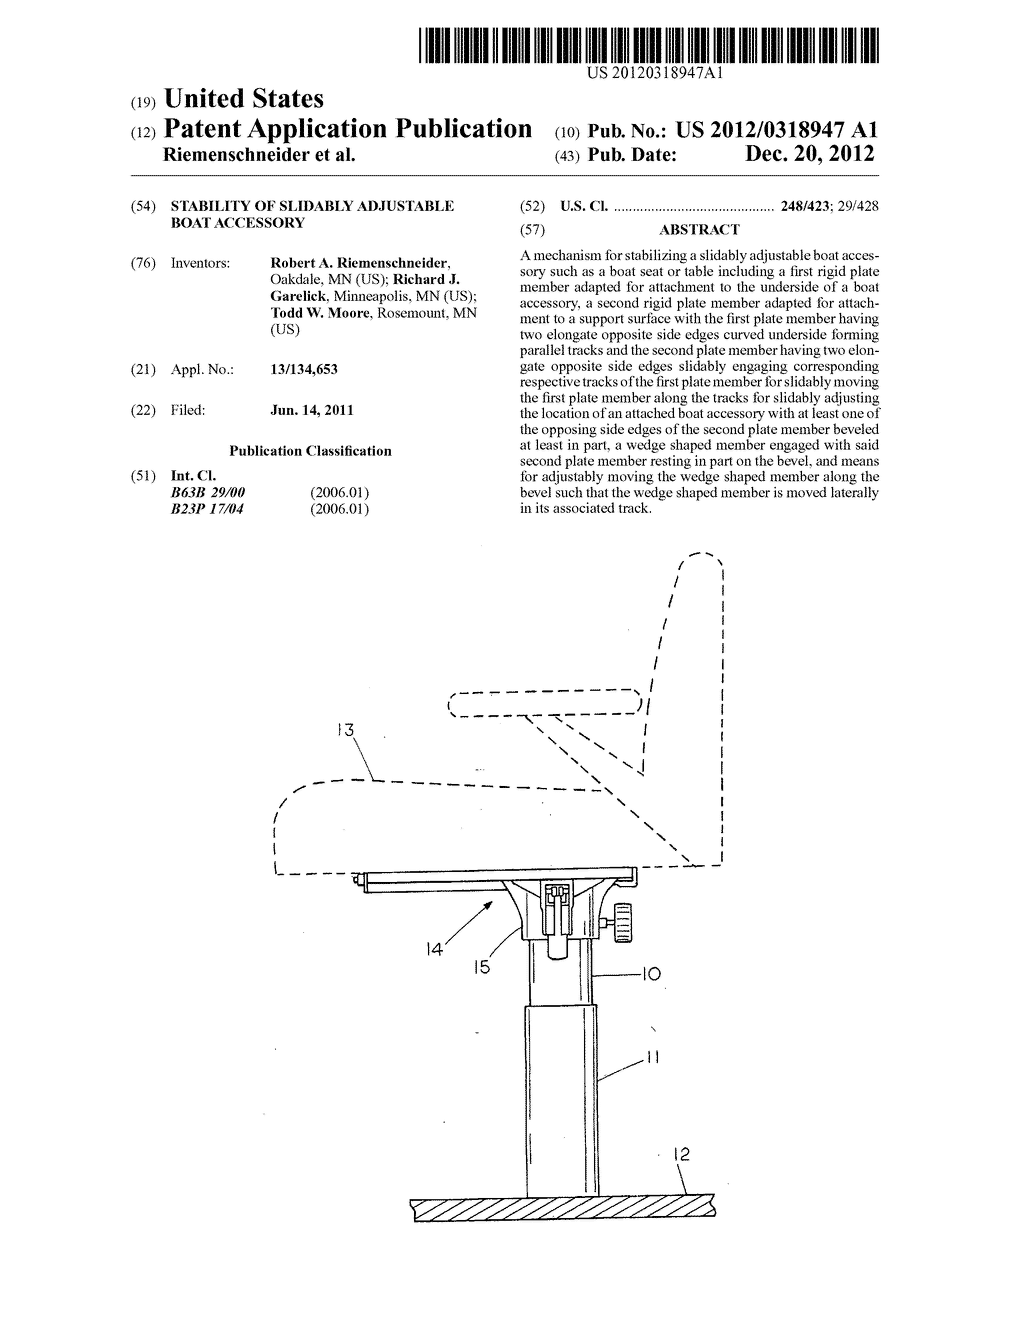 Stability of slidably adjustable boat accessory - diagram, schematic, and image 01